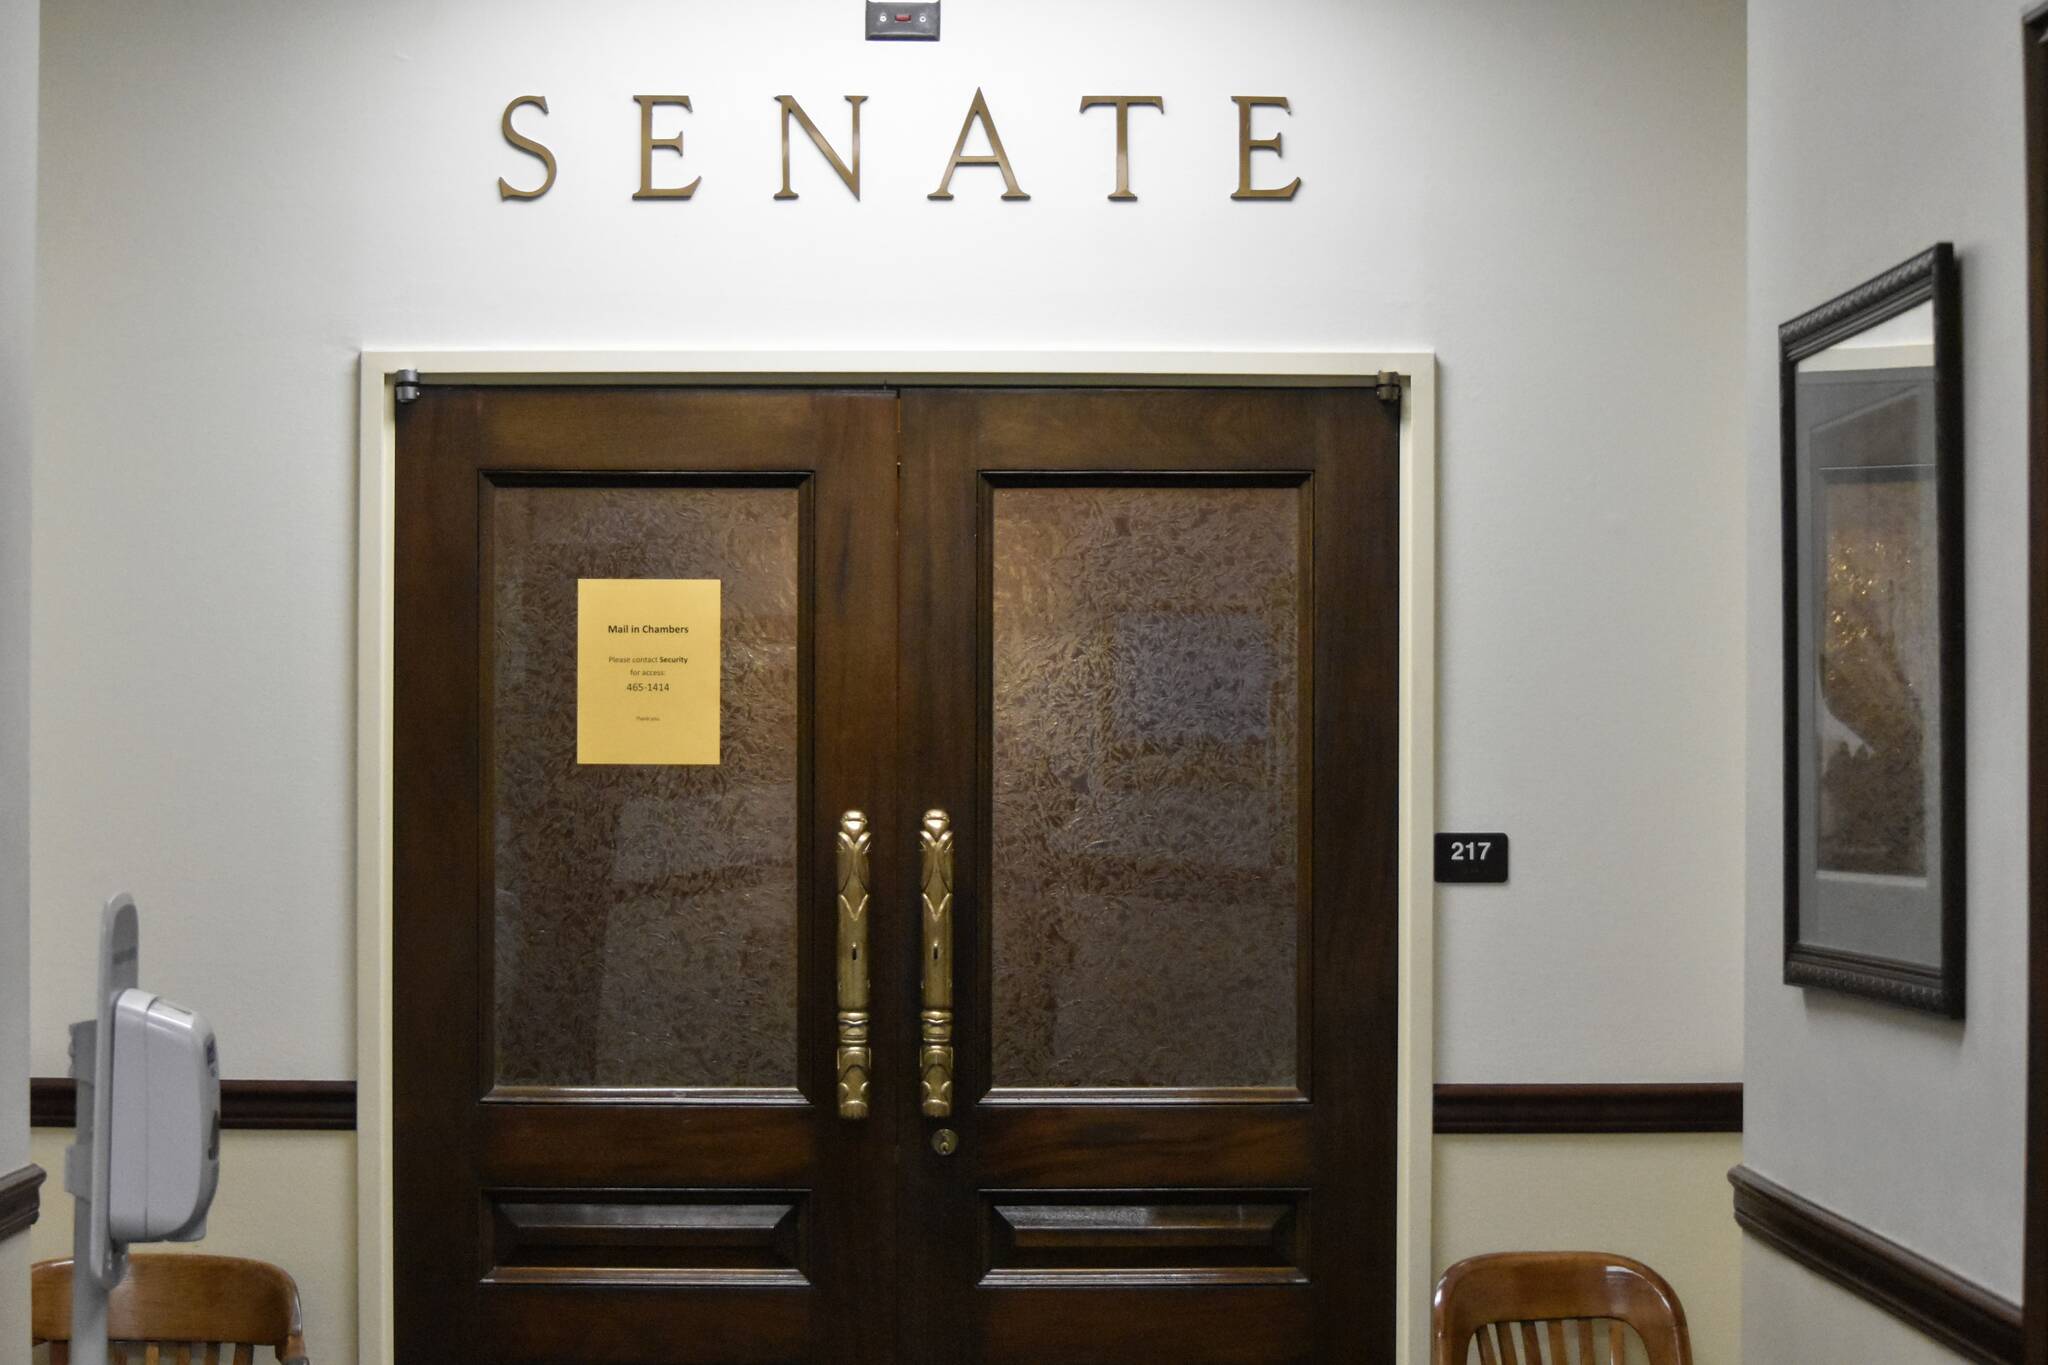 The doors of the Alaska Senate chambers were shut Friday, Oct. 8, 2021, a week into the Alaska State Legislature’s fourth special session of the year. Gov. Mike Dunleavy called lawmakers to session to resolve the state’s longterm fiscal issues, but the same divisions that have kept lawmakers from finding resolution before are still in place. (Peter Segall / Juneau Empire)